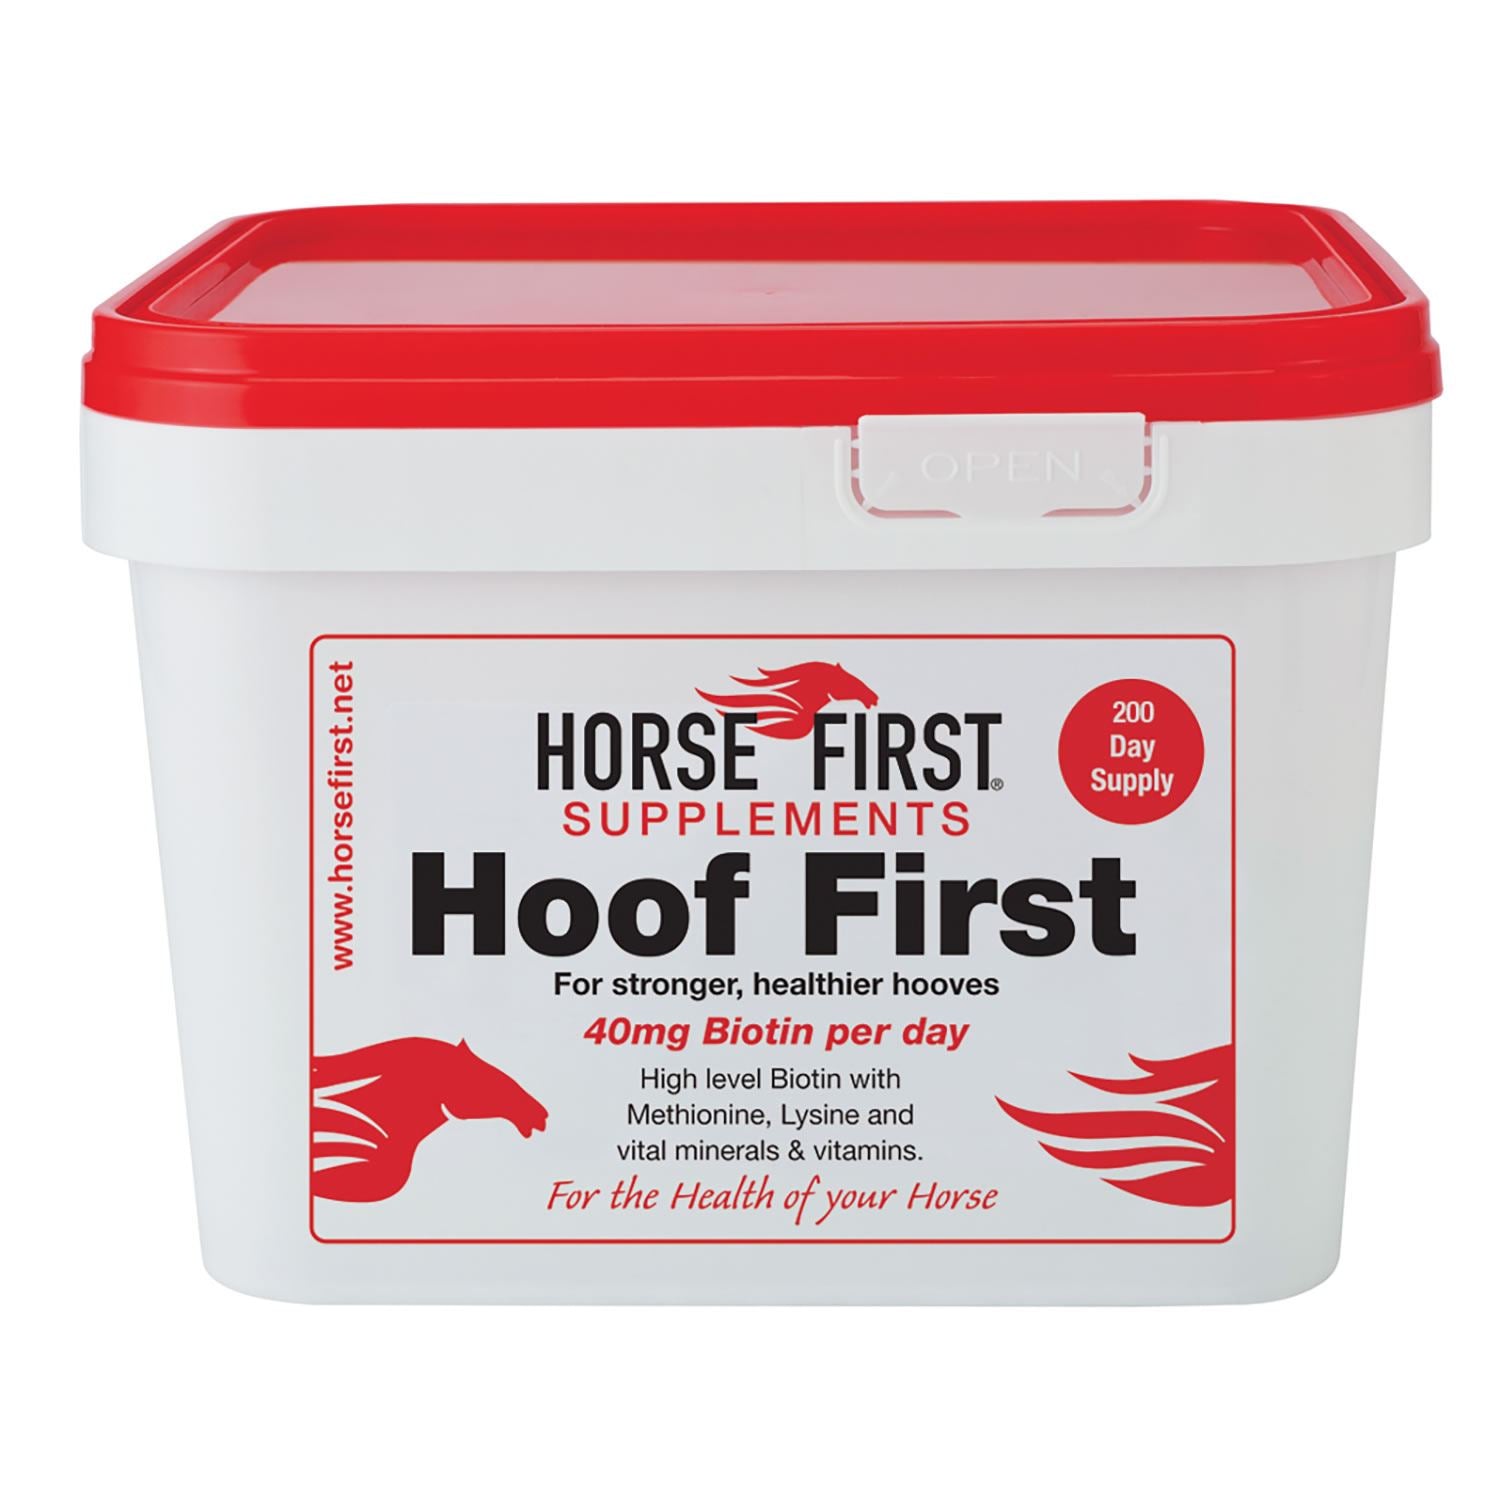 HORSE FIRST HOOF FIRST: High strength biotin with essential vitamins and minerals for healthy hooves